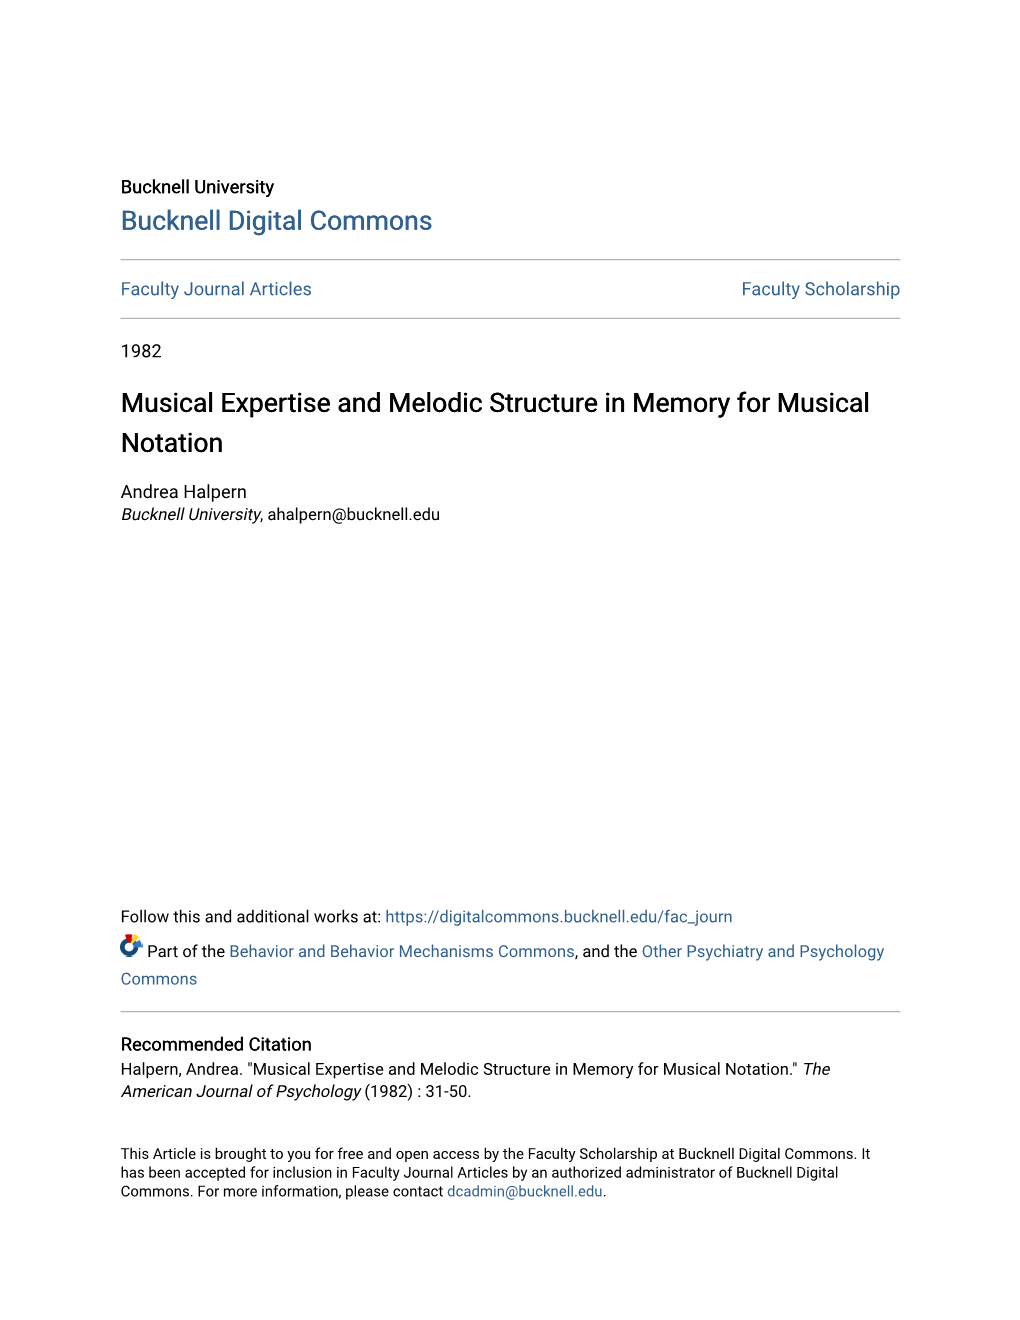 Musical Expertise and Melodic Structure in Memory for Musical Notation